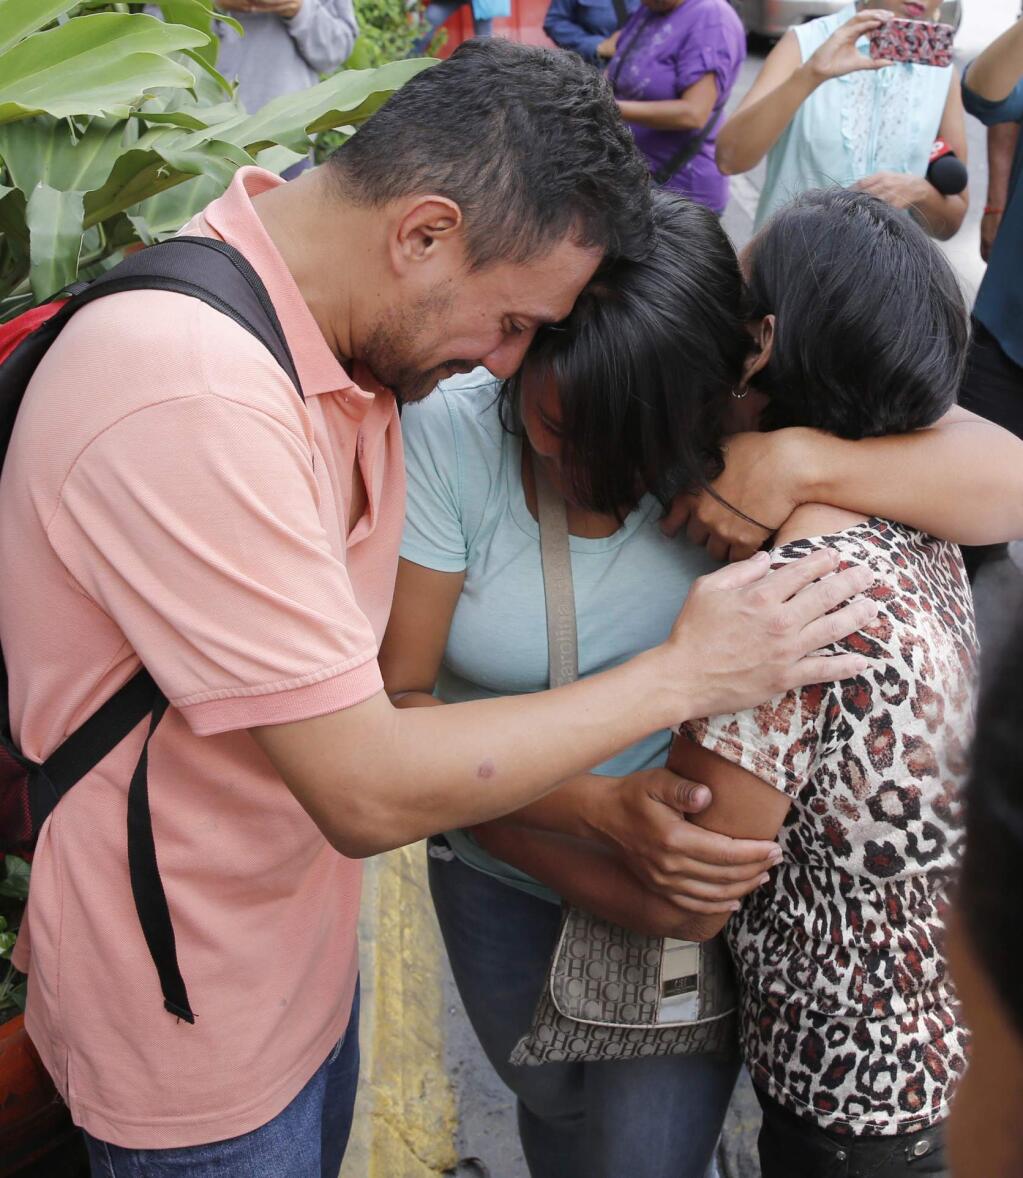 Barbara Barca, center, a survivor of the stampede at a crowded nightclub, is hugged by relatives as they leave police headquarters in Caracas, Venezuela, Saturday, June 16, 2018. Venezuela's government says 17 people were killed early Saturday after a tear gas device was set off during a nightclub brawl in the capital, leading hundreds of people to flee. (AP Photo/Ariana Cubillos)